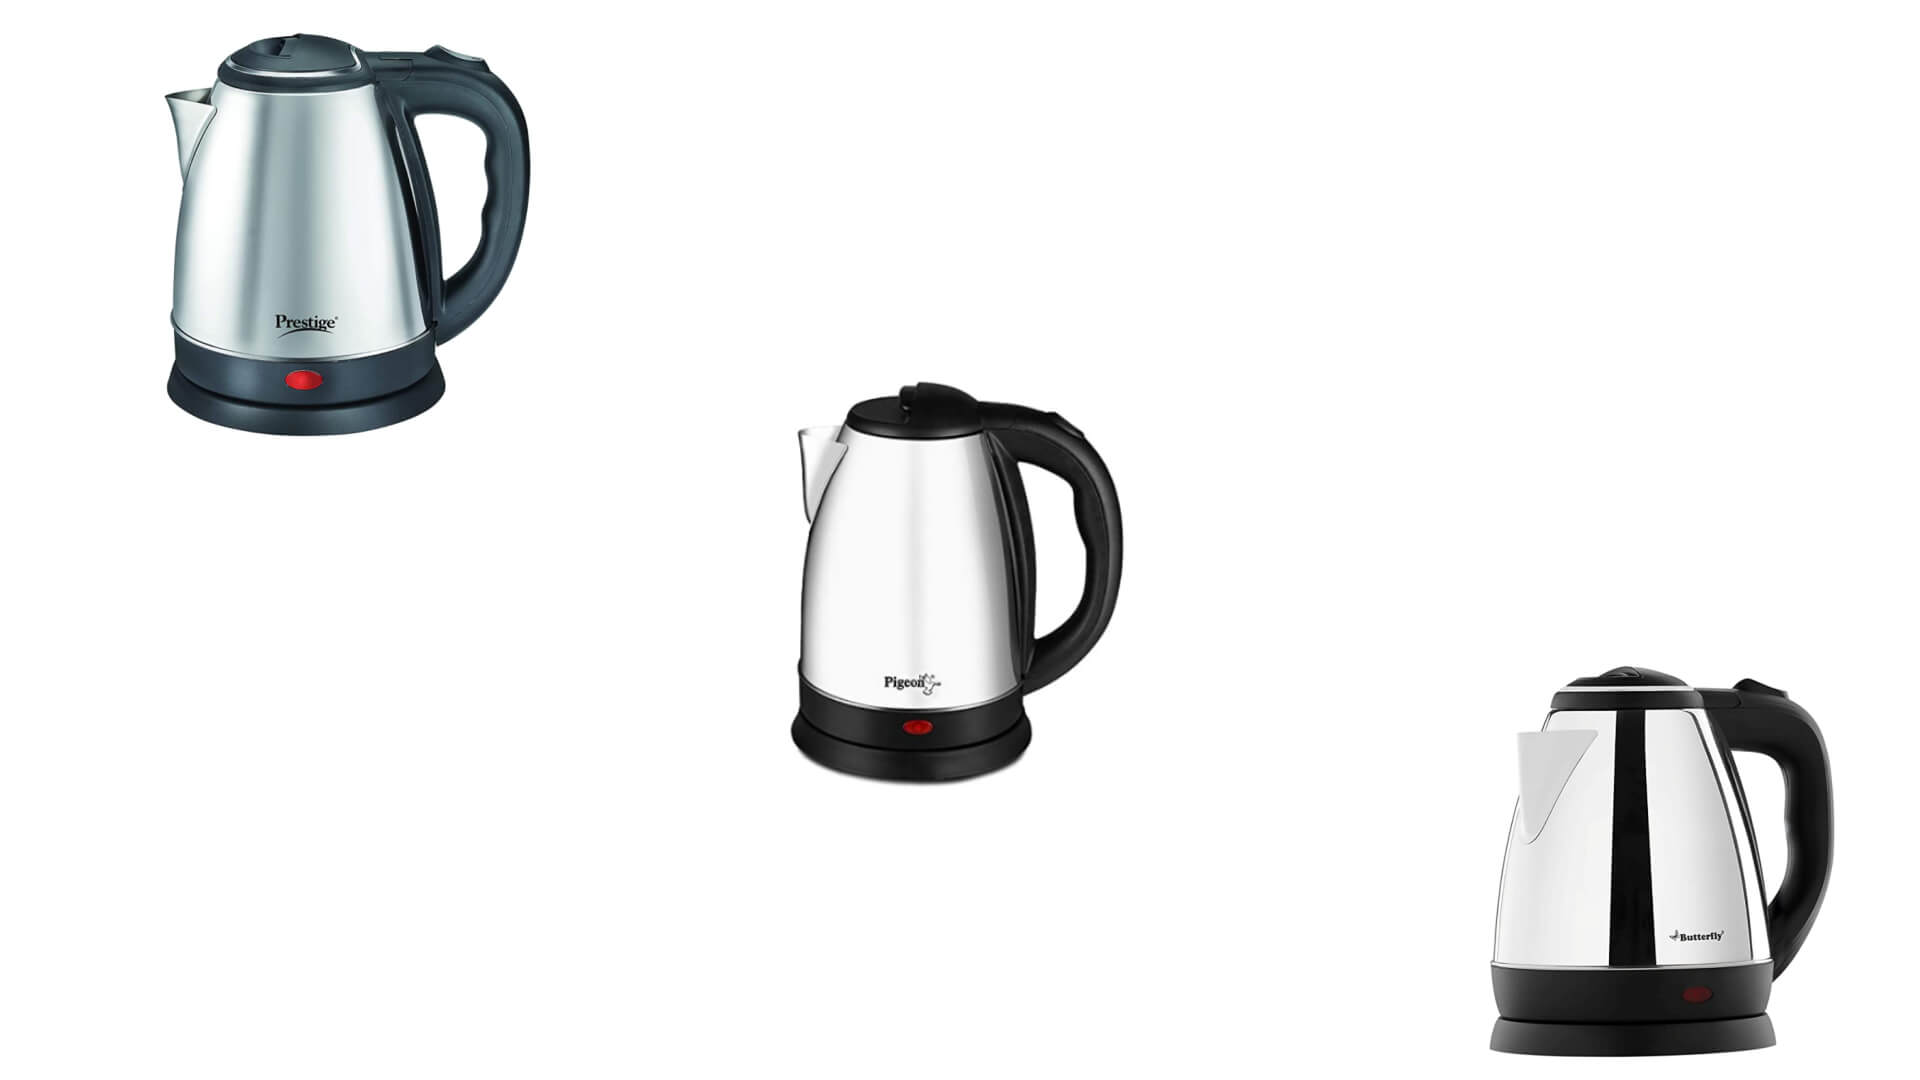 Best Brands Of Electric Kettles